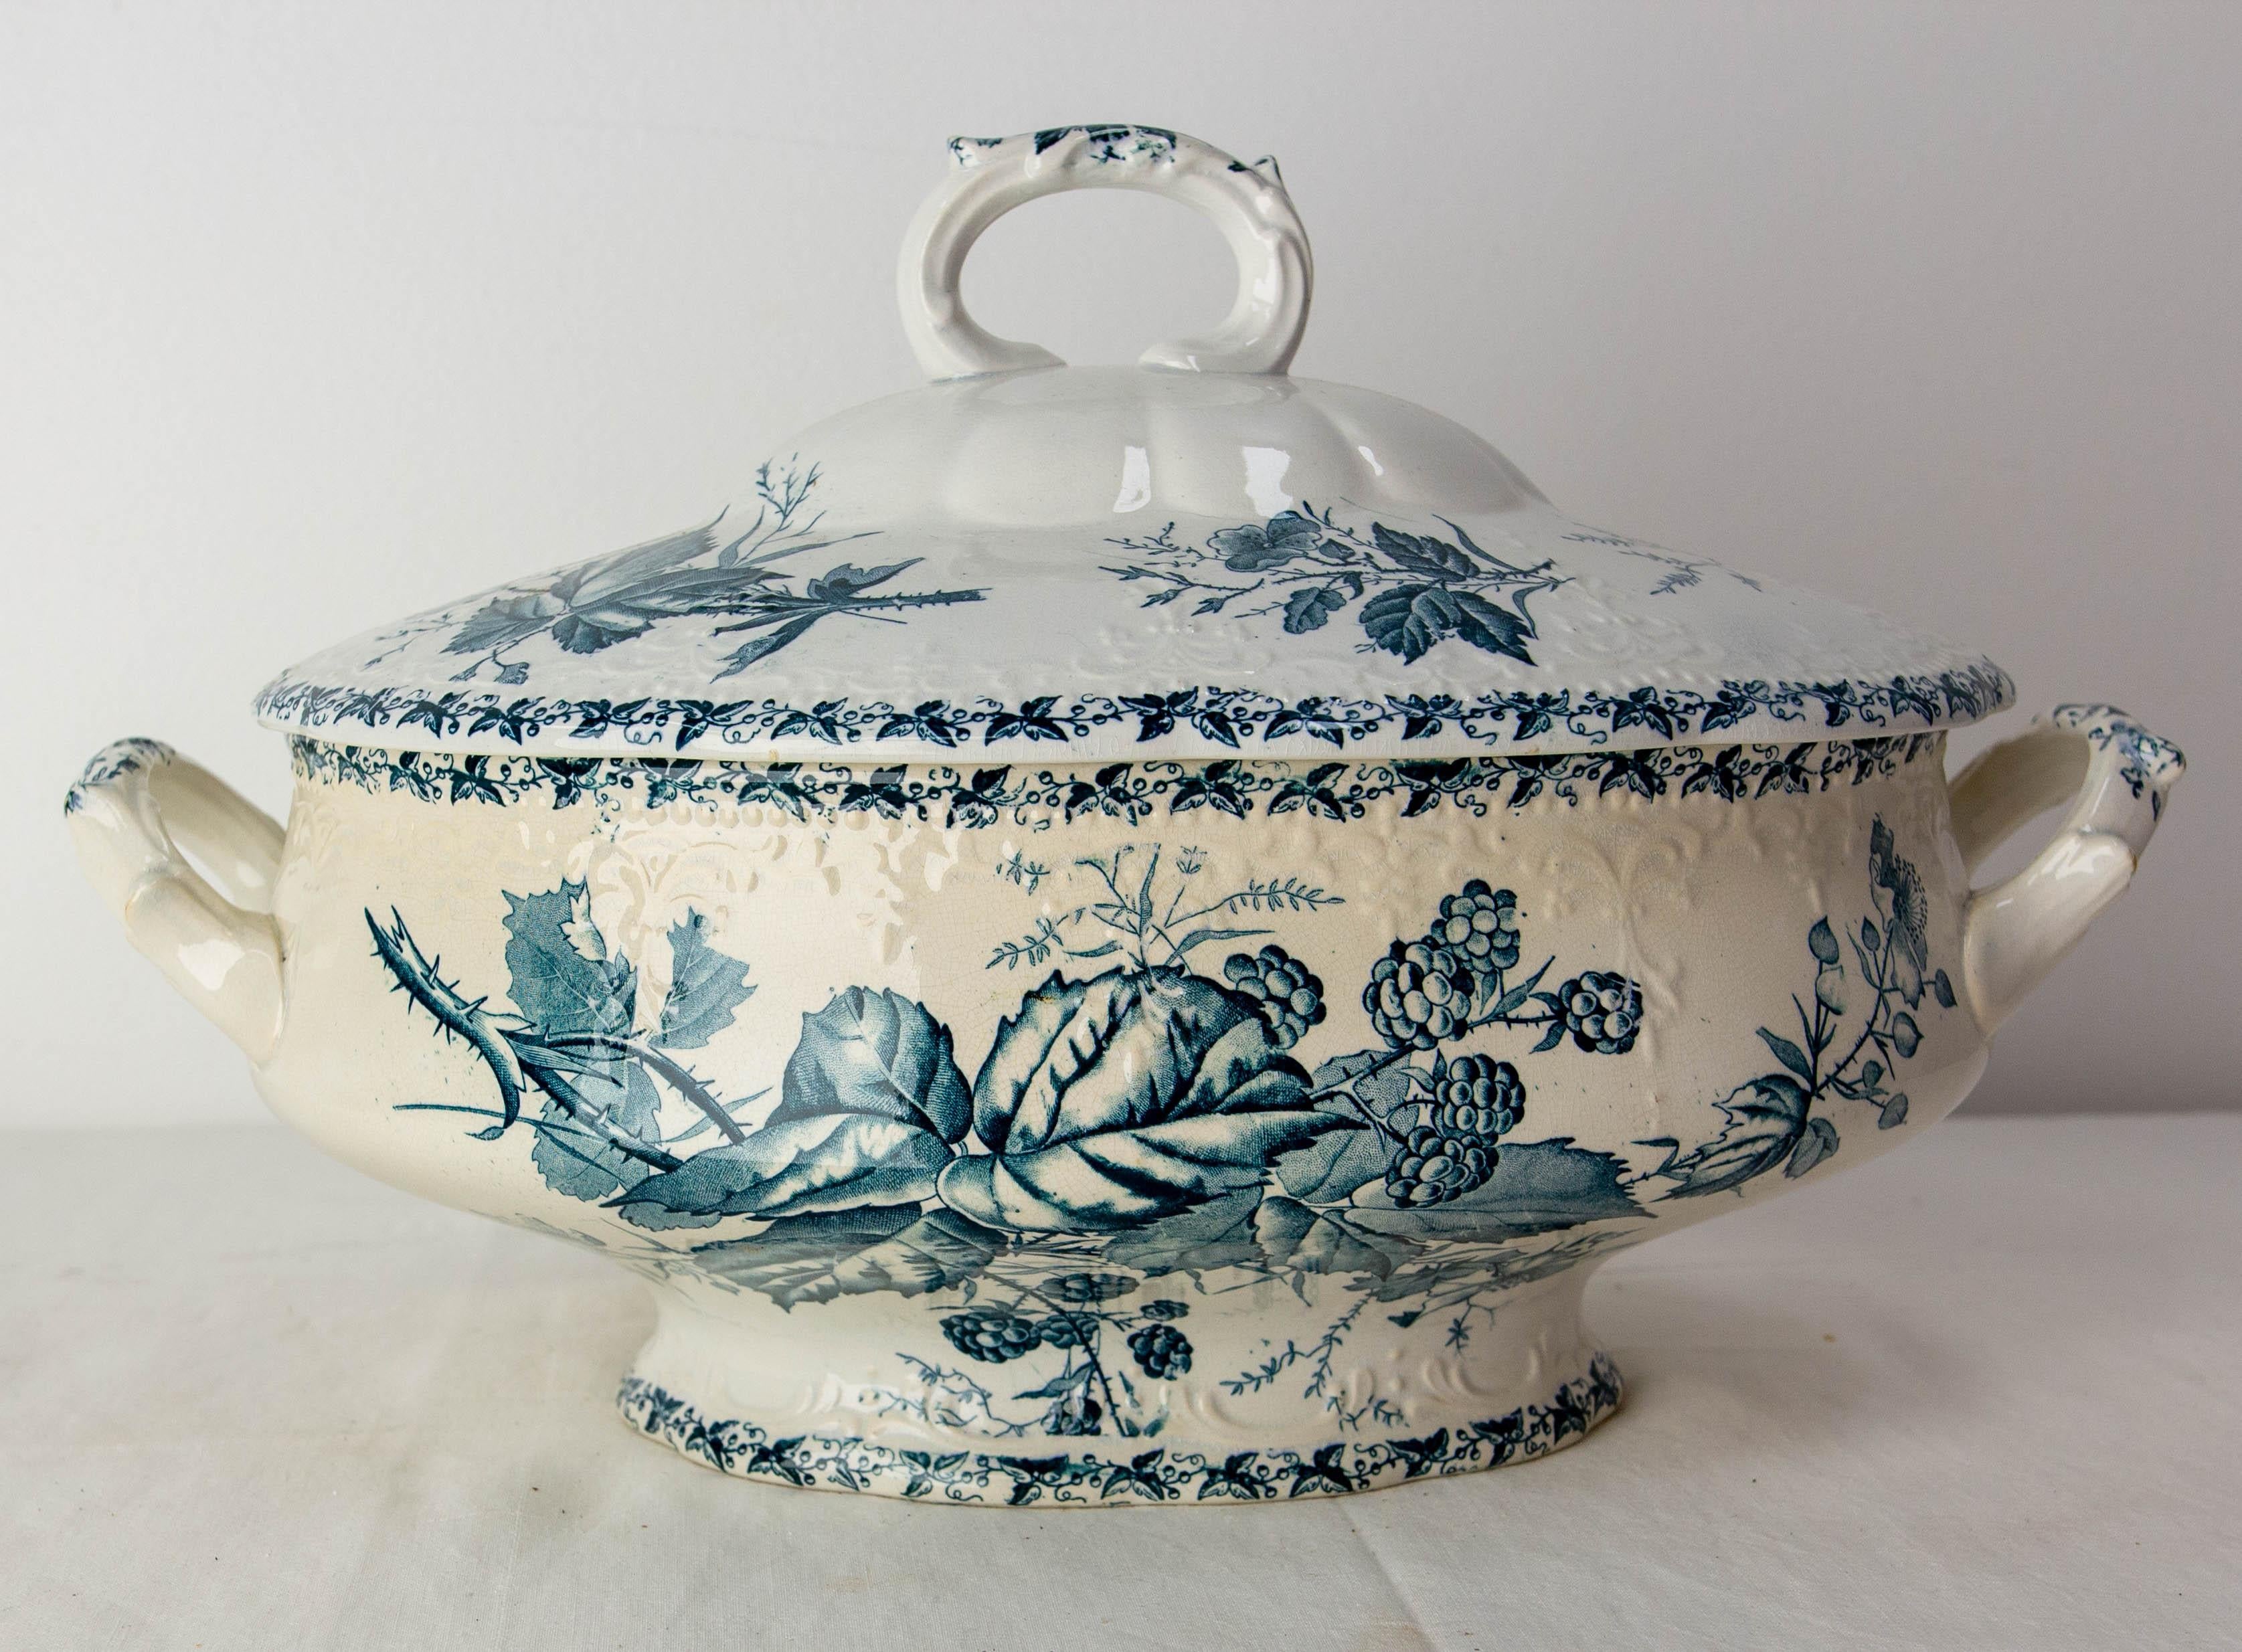 French soupière or soup bowl.
White faience soup tureen with green blue floral decoration on the top and on the bowl.
Can also be used as a center piece.
Made circa 1900
Good condition.

Shipping:
19 / 34 / H 21 cm 1.6 Kg.